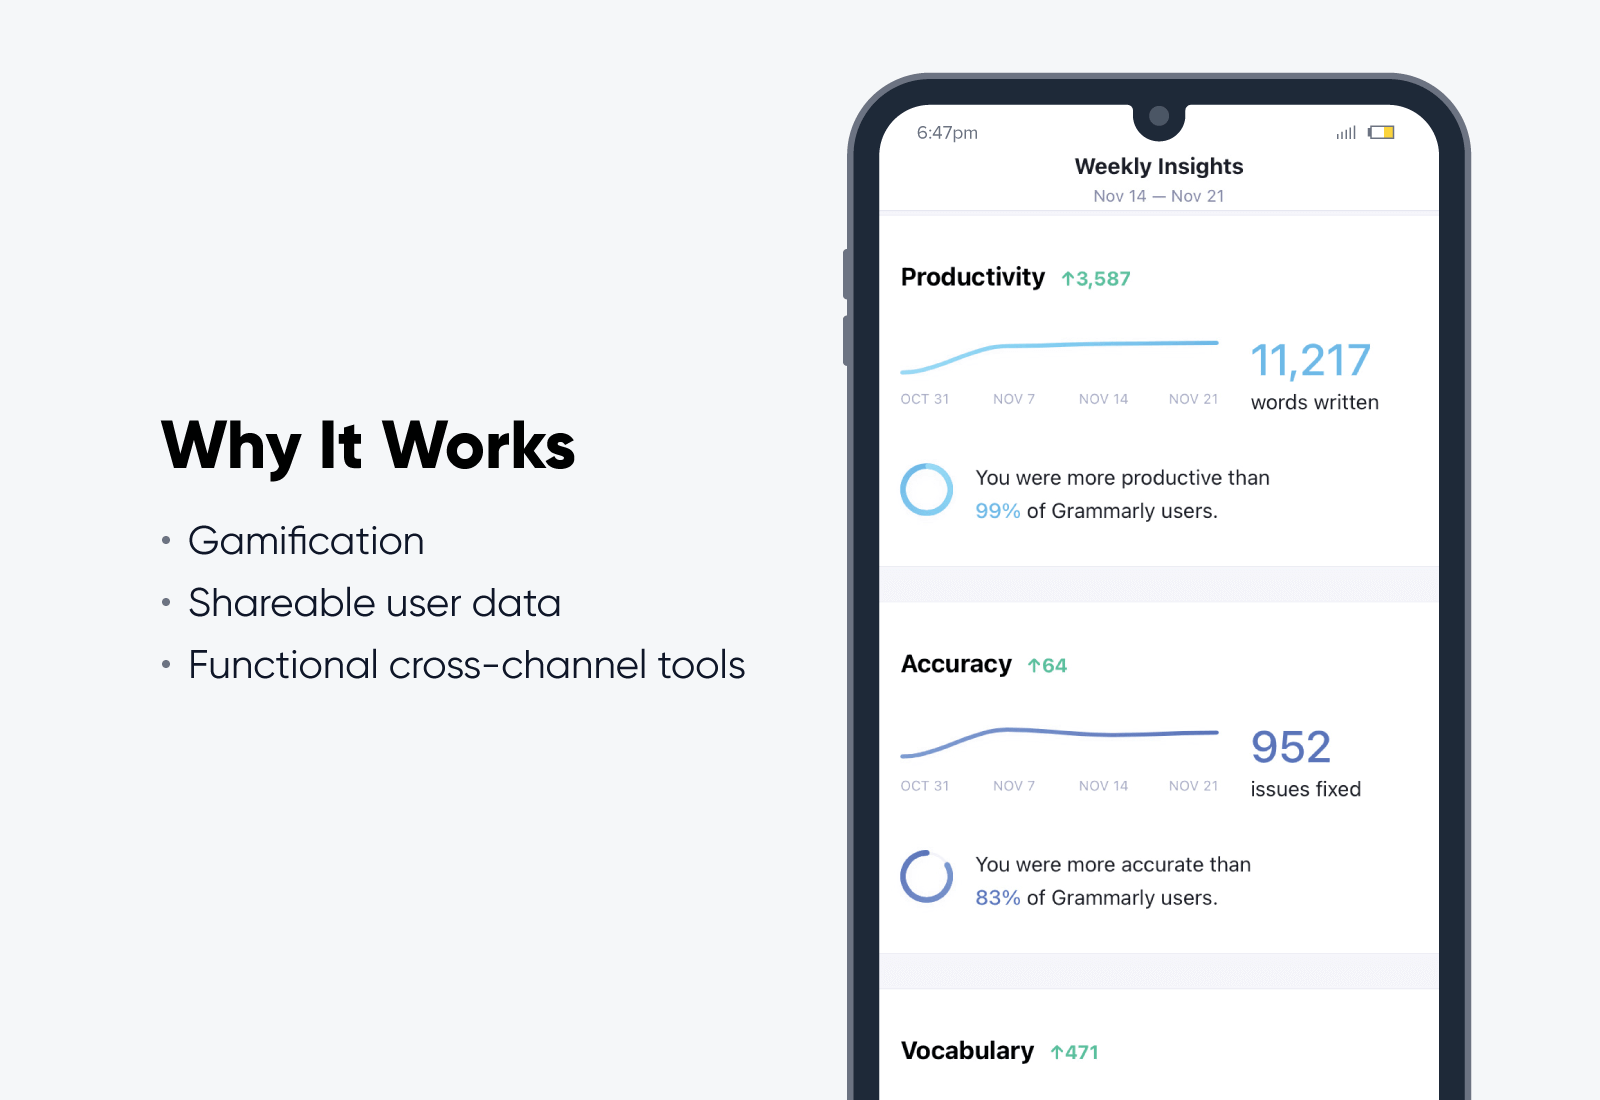 Mockup of a Grammarly Weekly Insights report on a phone screen illustrating their user data program with bullet points that explain why it works as an omnichannel marketing strategy.